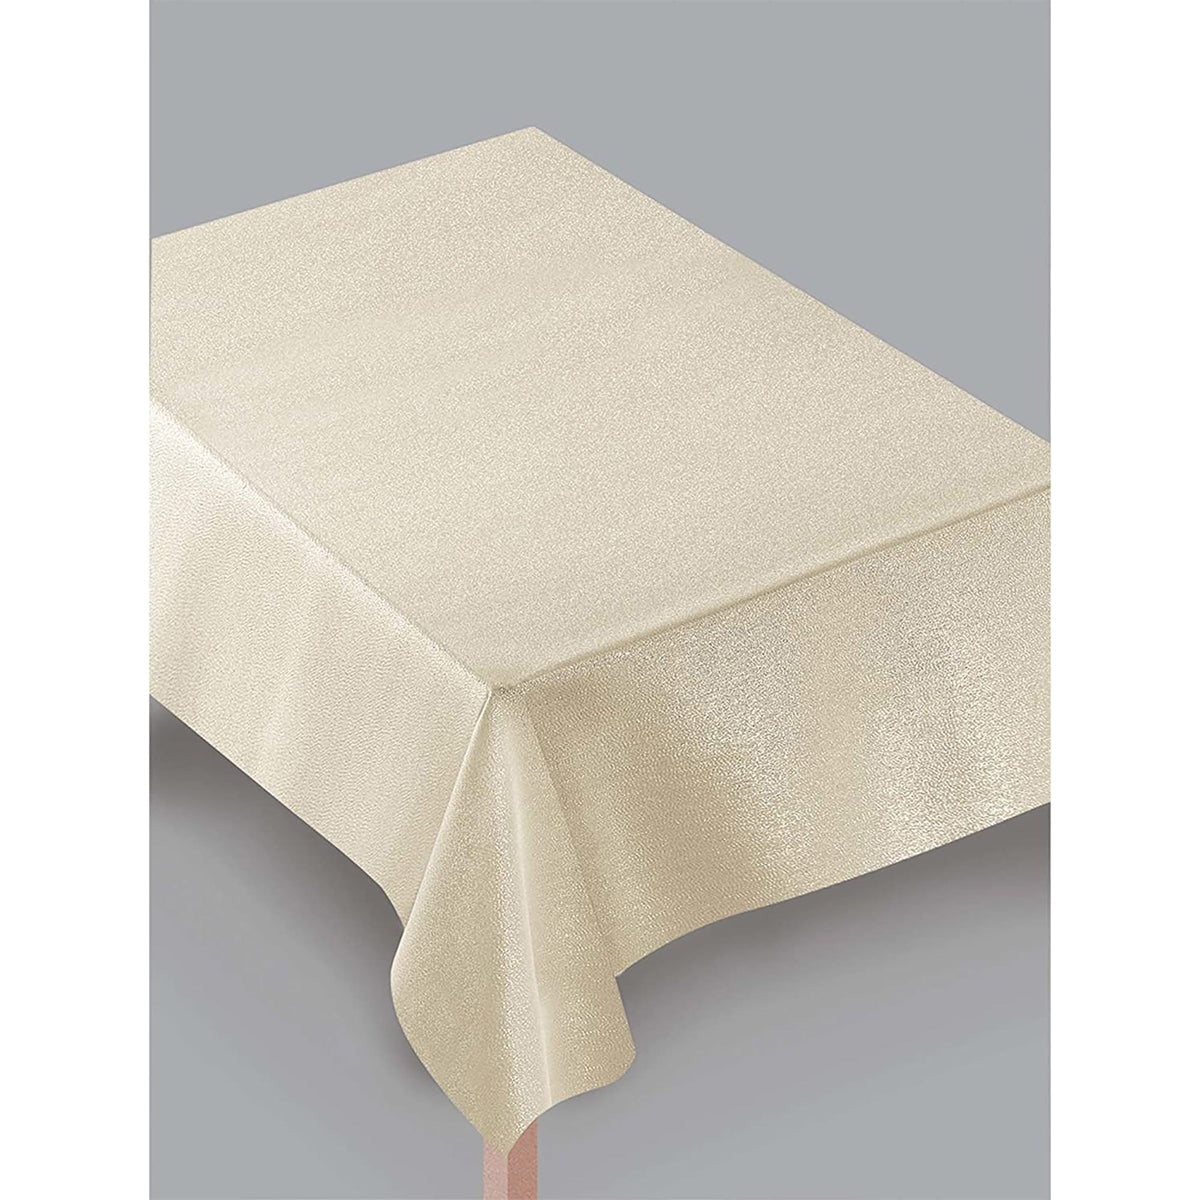 AMSCAN CA Disposable-Plasticware Metallic Beige Rectangular Tablecloth, 60 x 84 Inches, 1 Count